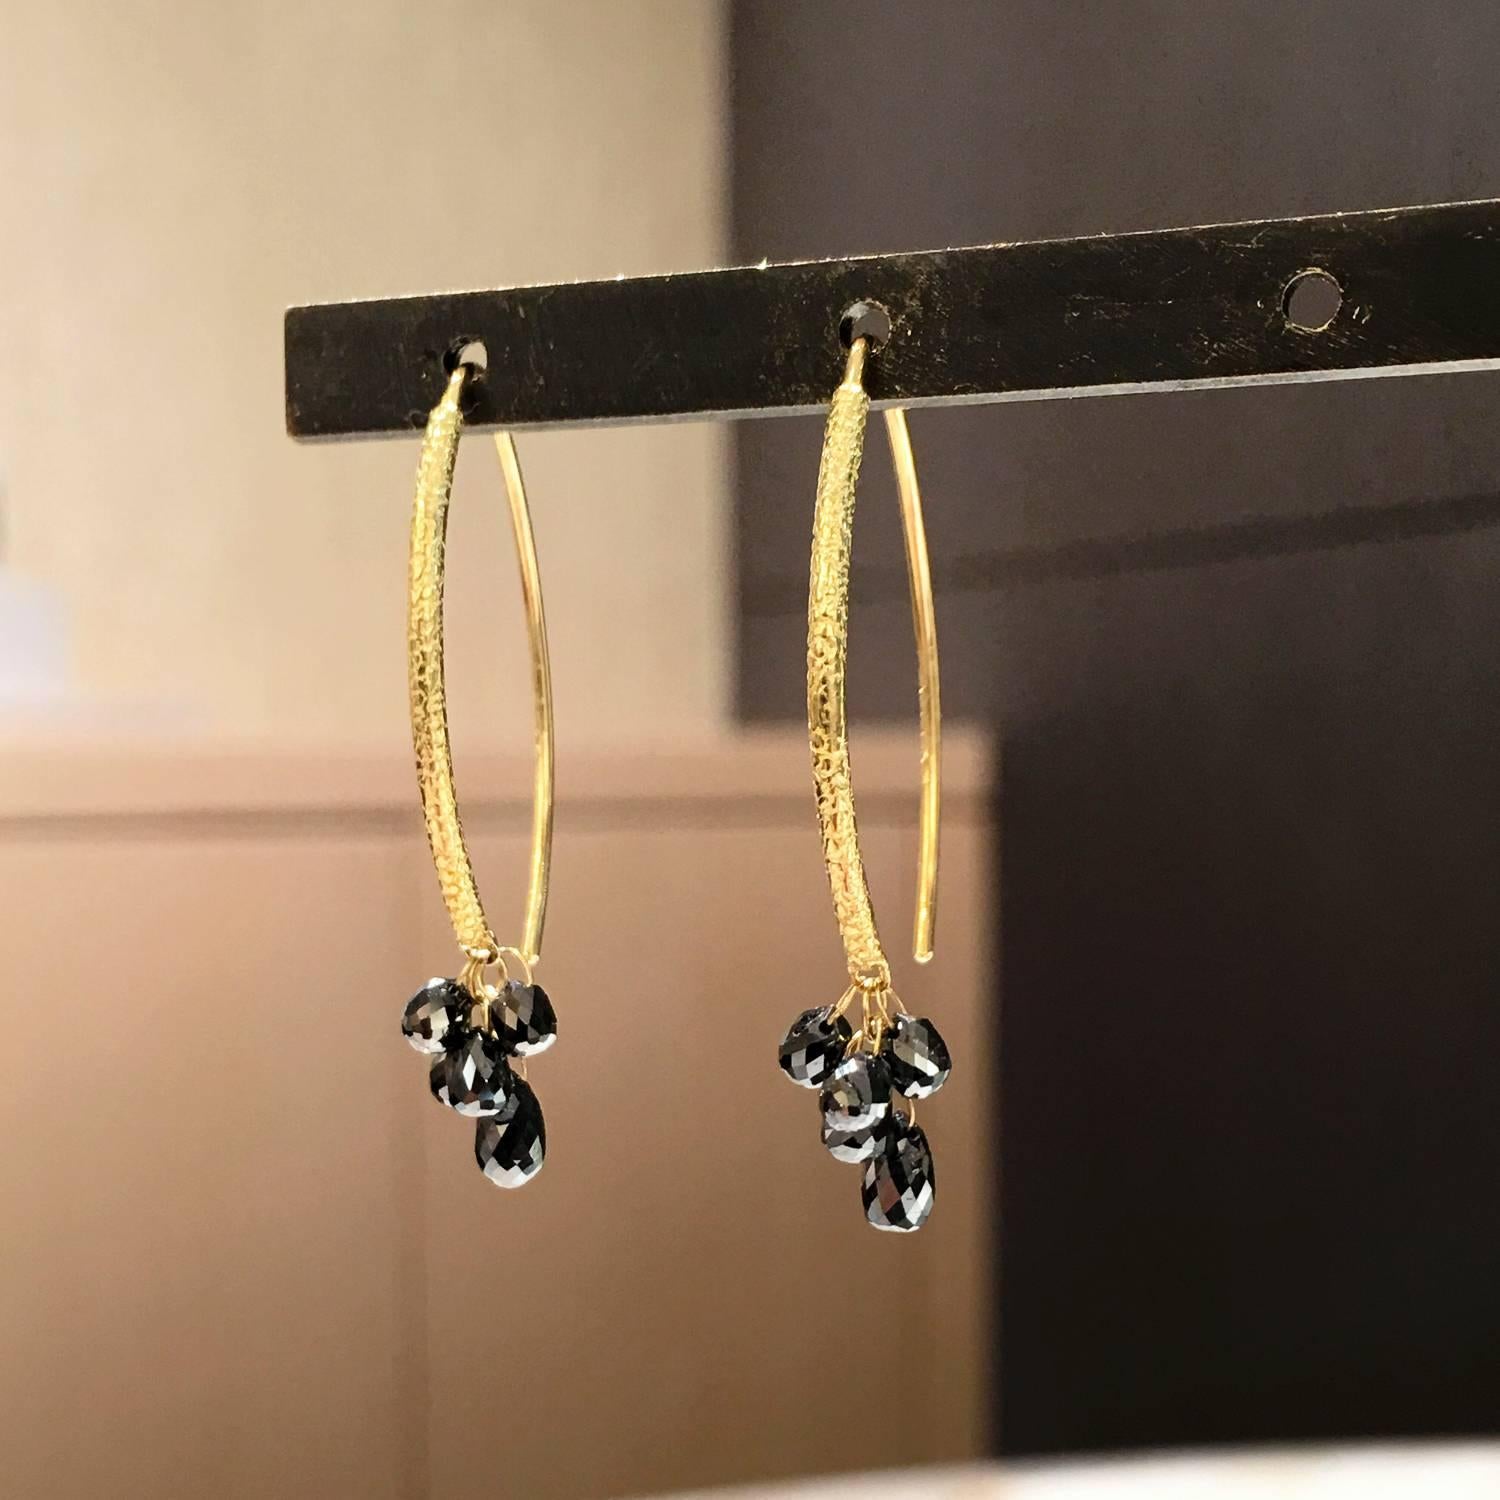 Drop Earrings handcrafted in matte-finished 18k yellow gold with 3.42 total carats of faceted black diamond briolettes attached by individual dangling 18k yellow gold loops. 